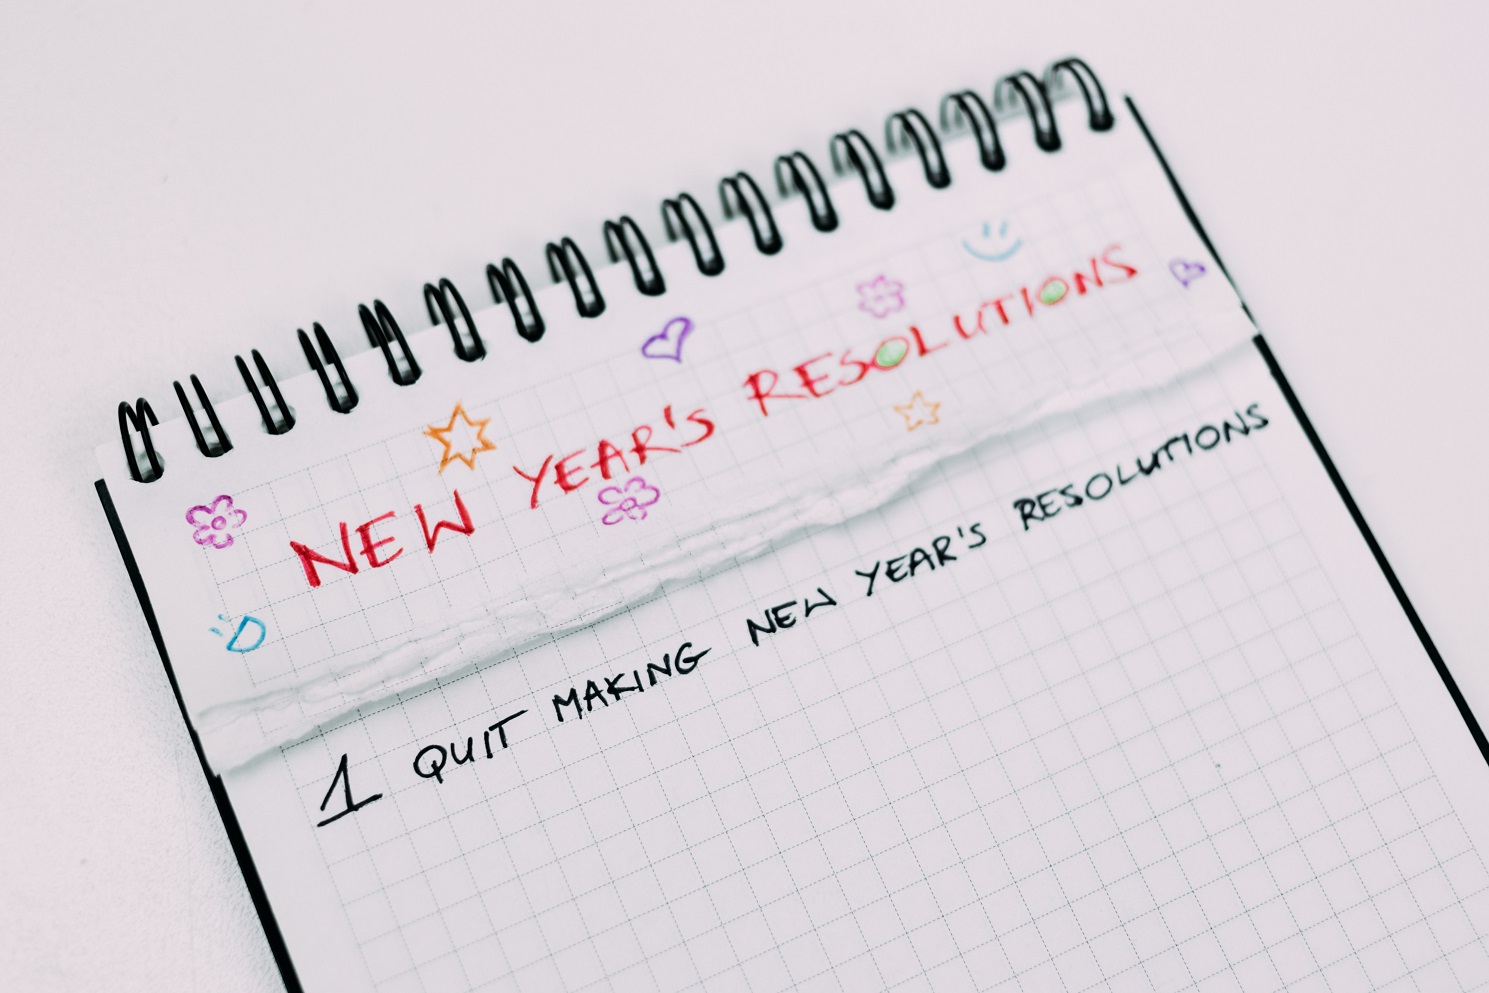 new-year-s-resolution-list-what-ranks-first-on-your-list-mary-s